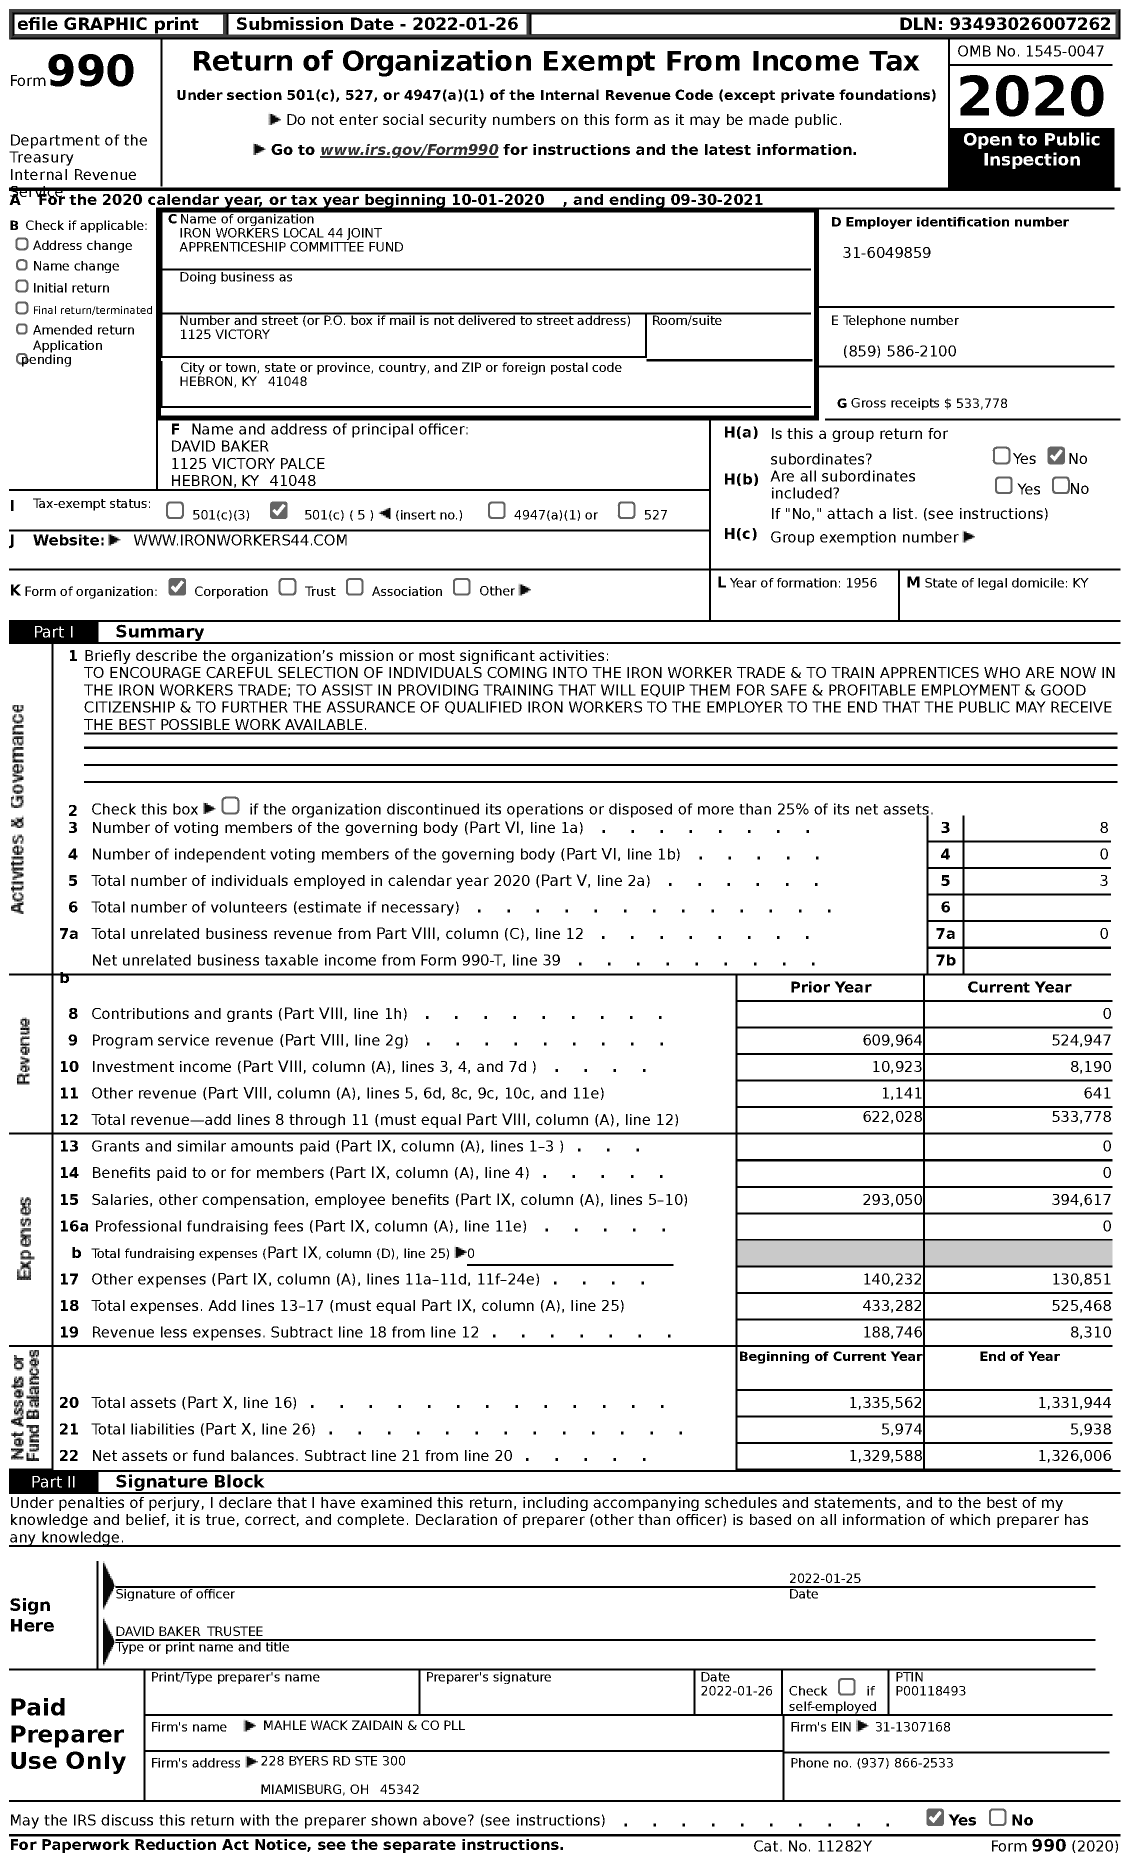 Image of first page of 2020 Form 990 for Iron Workers Local 44 Joint Apprenticeship Committee Fund